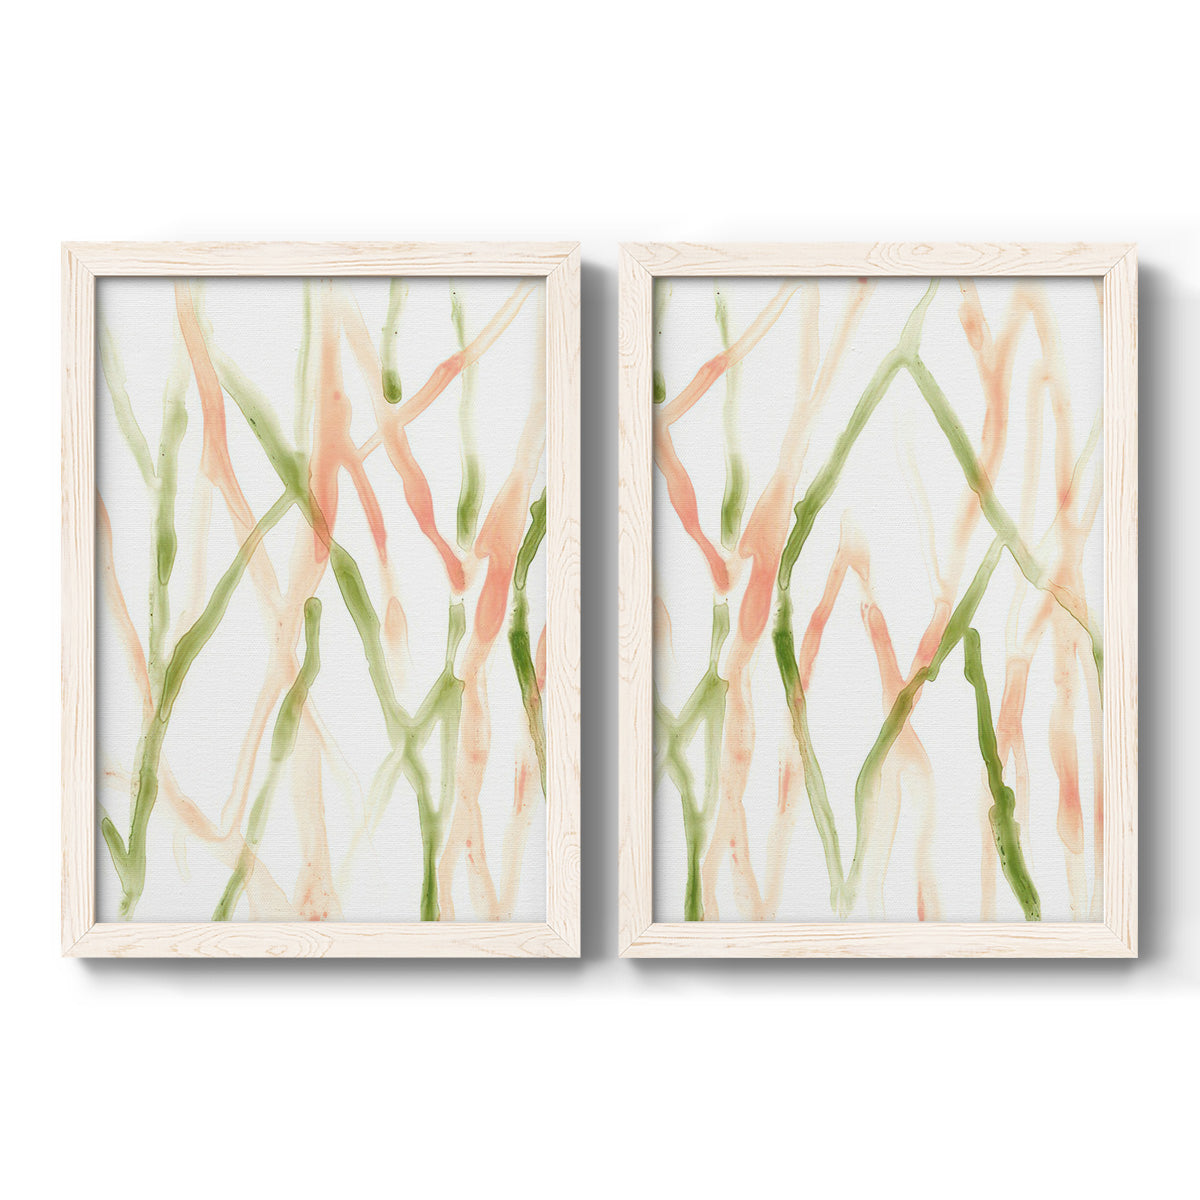 Runnel XIII - Premium Framed Canvas 2 Piece Set - Ready to Hang